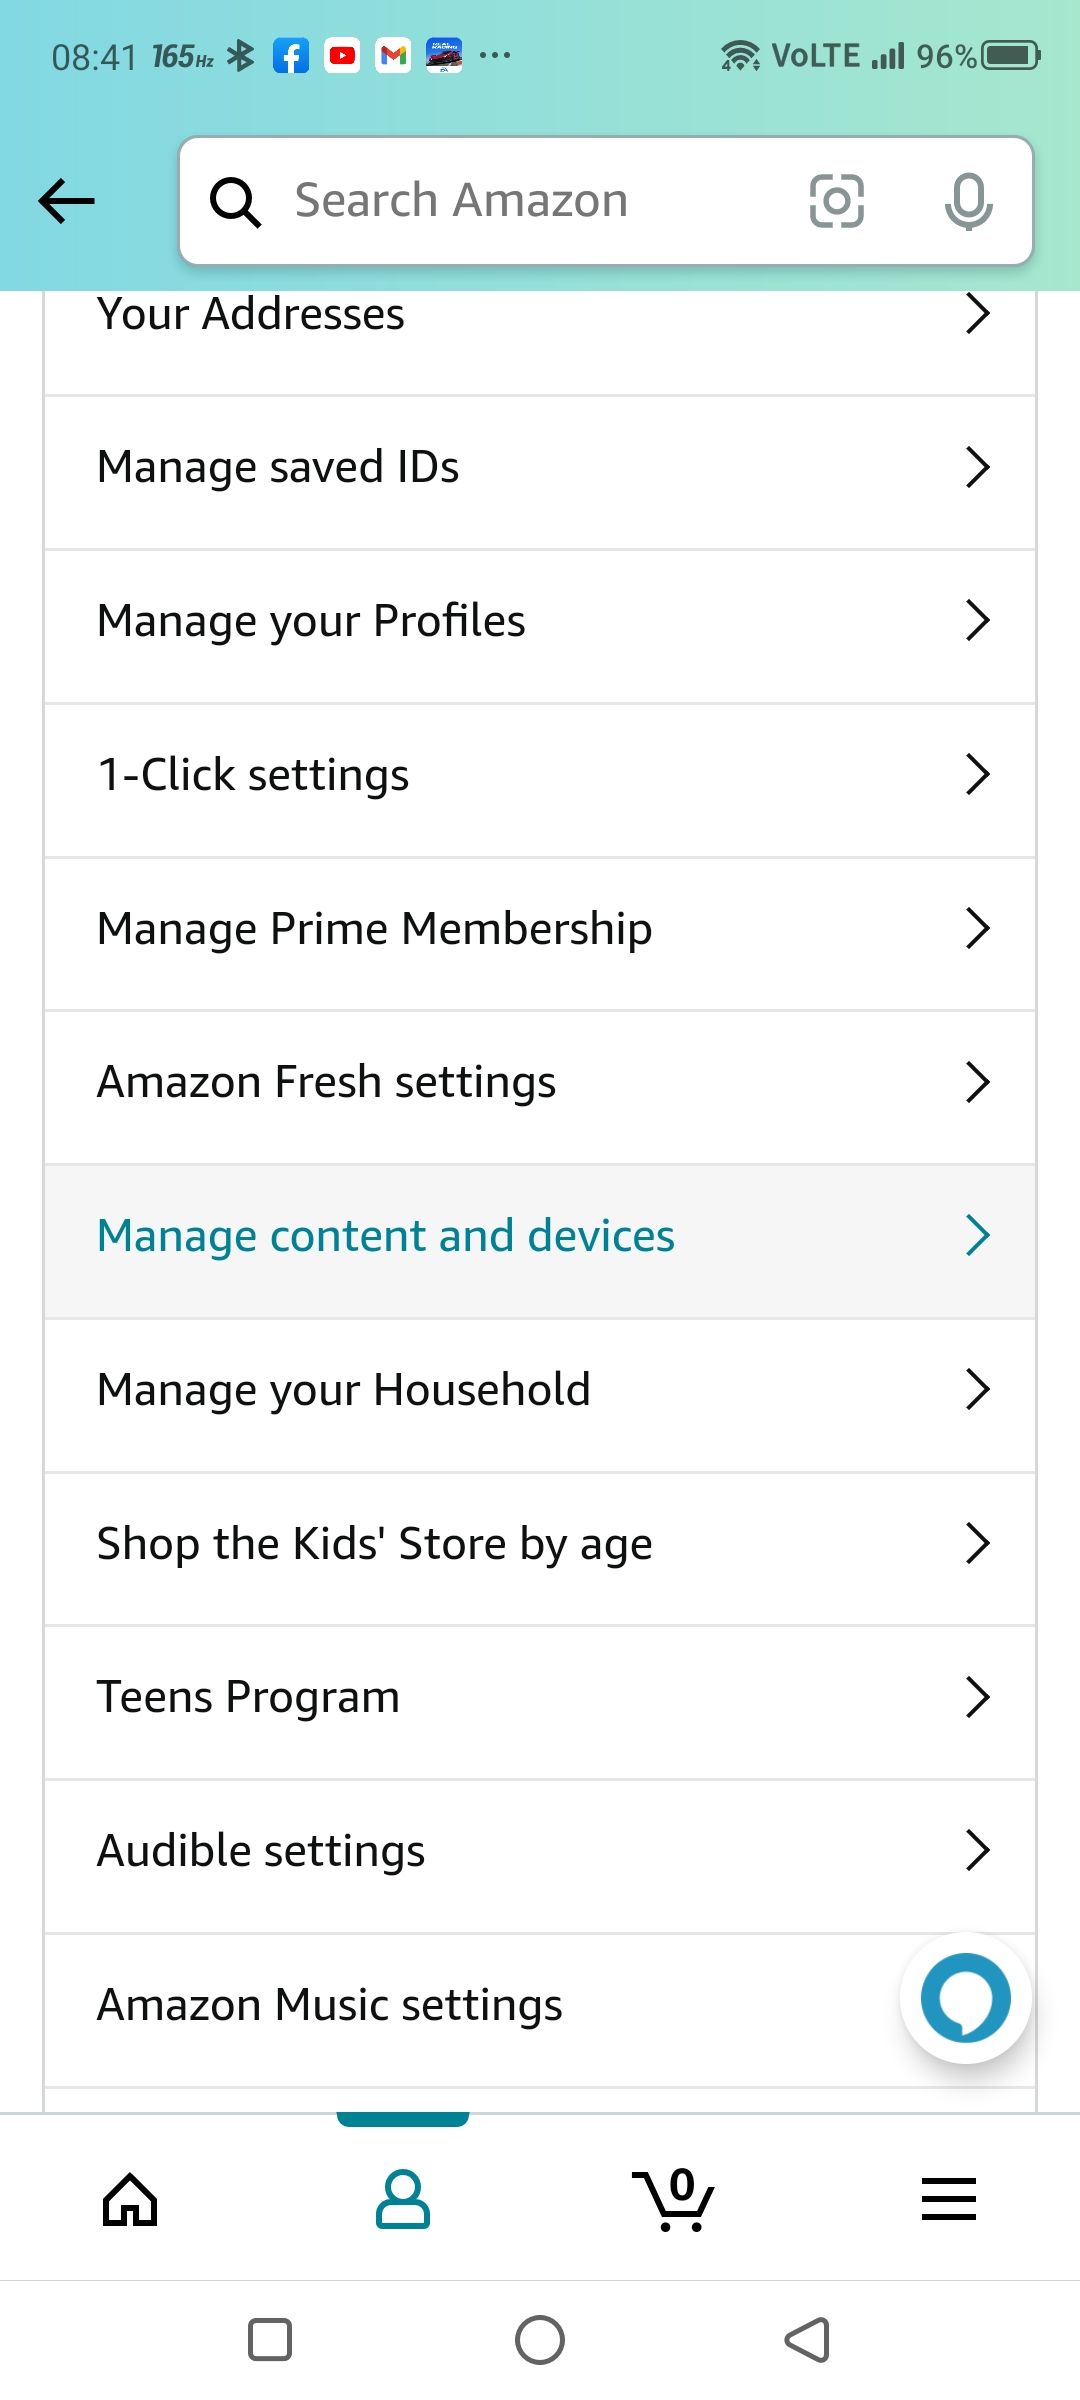 Manage content and devices on Amazon settings screenshot